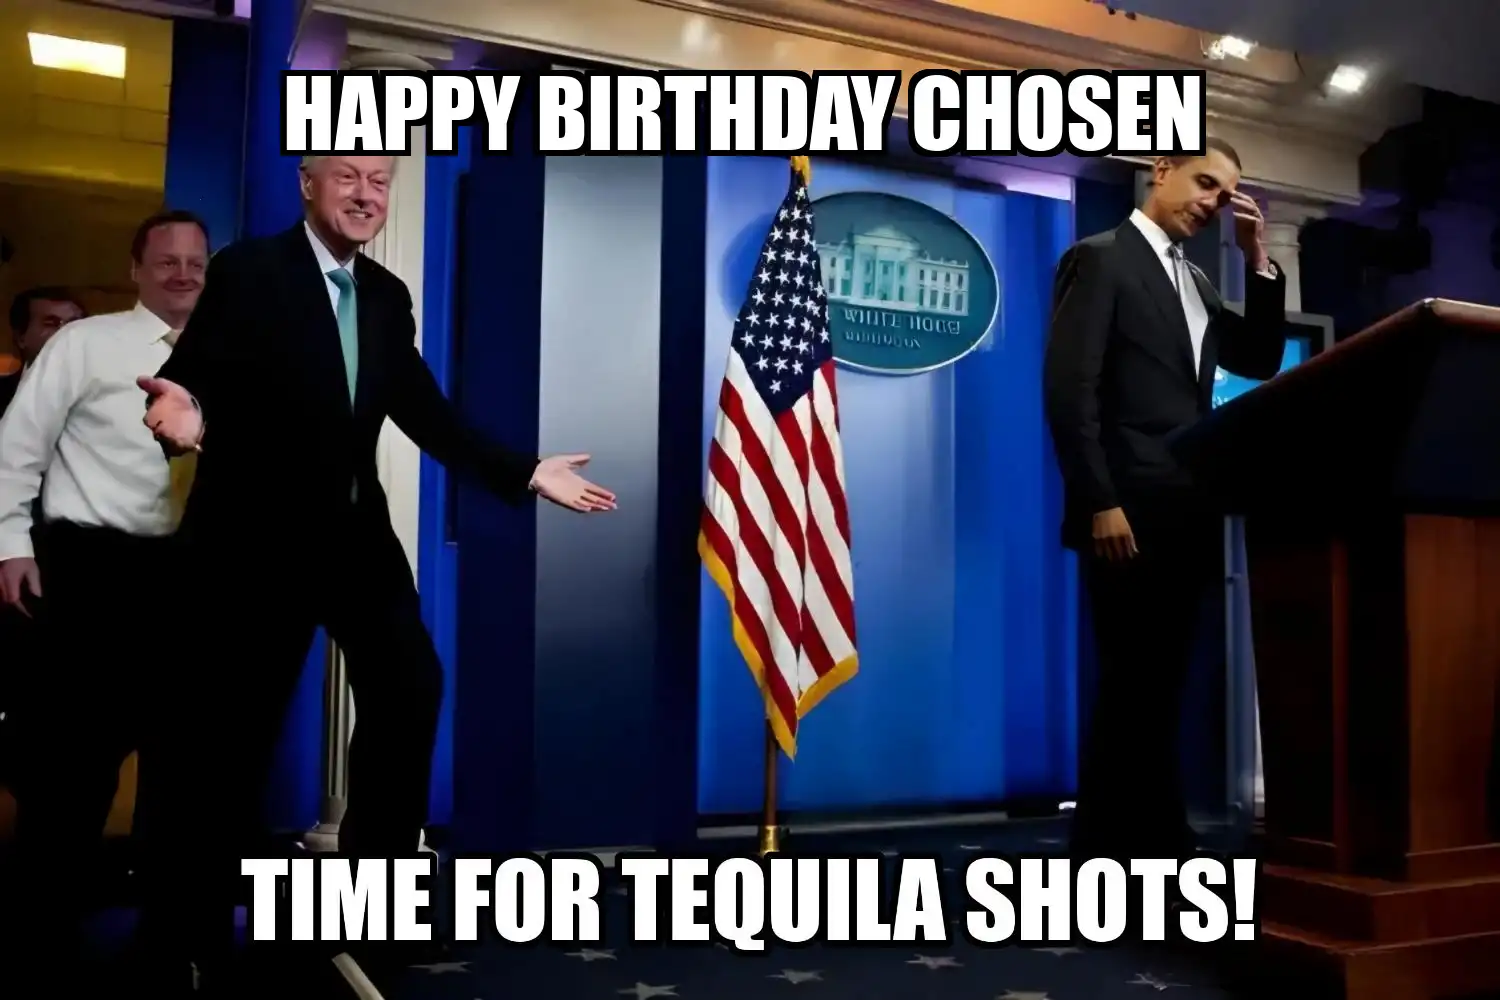 Happy Birthday Chosen Time For Tequila Shots Memes